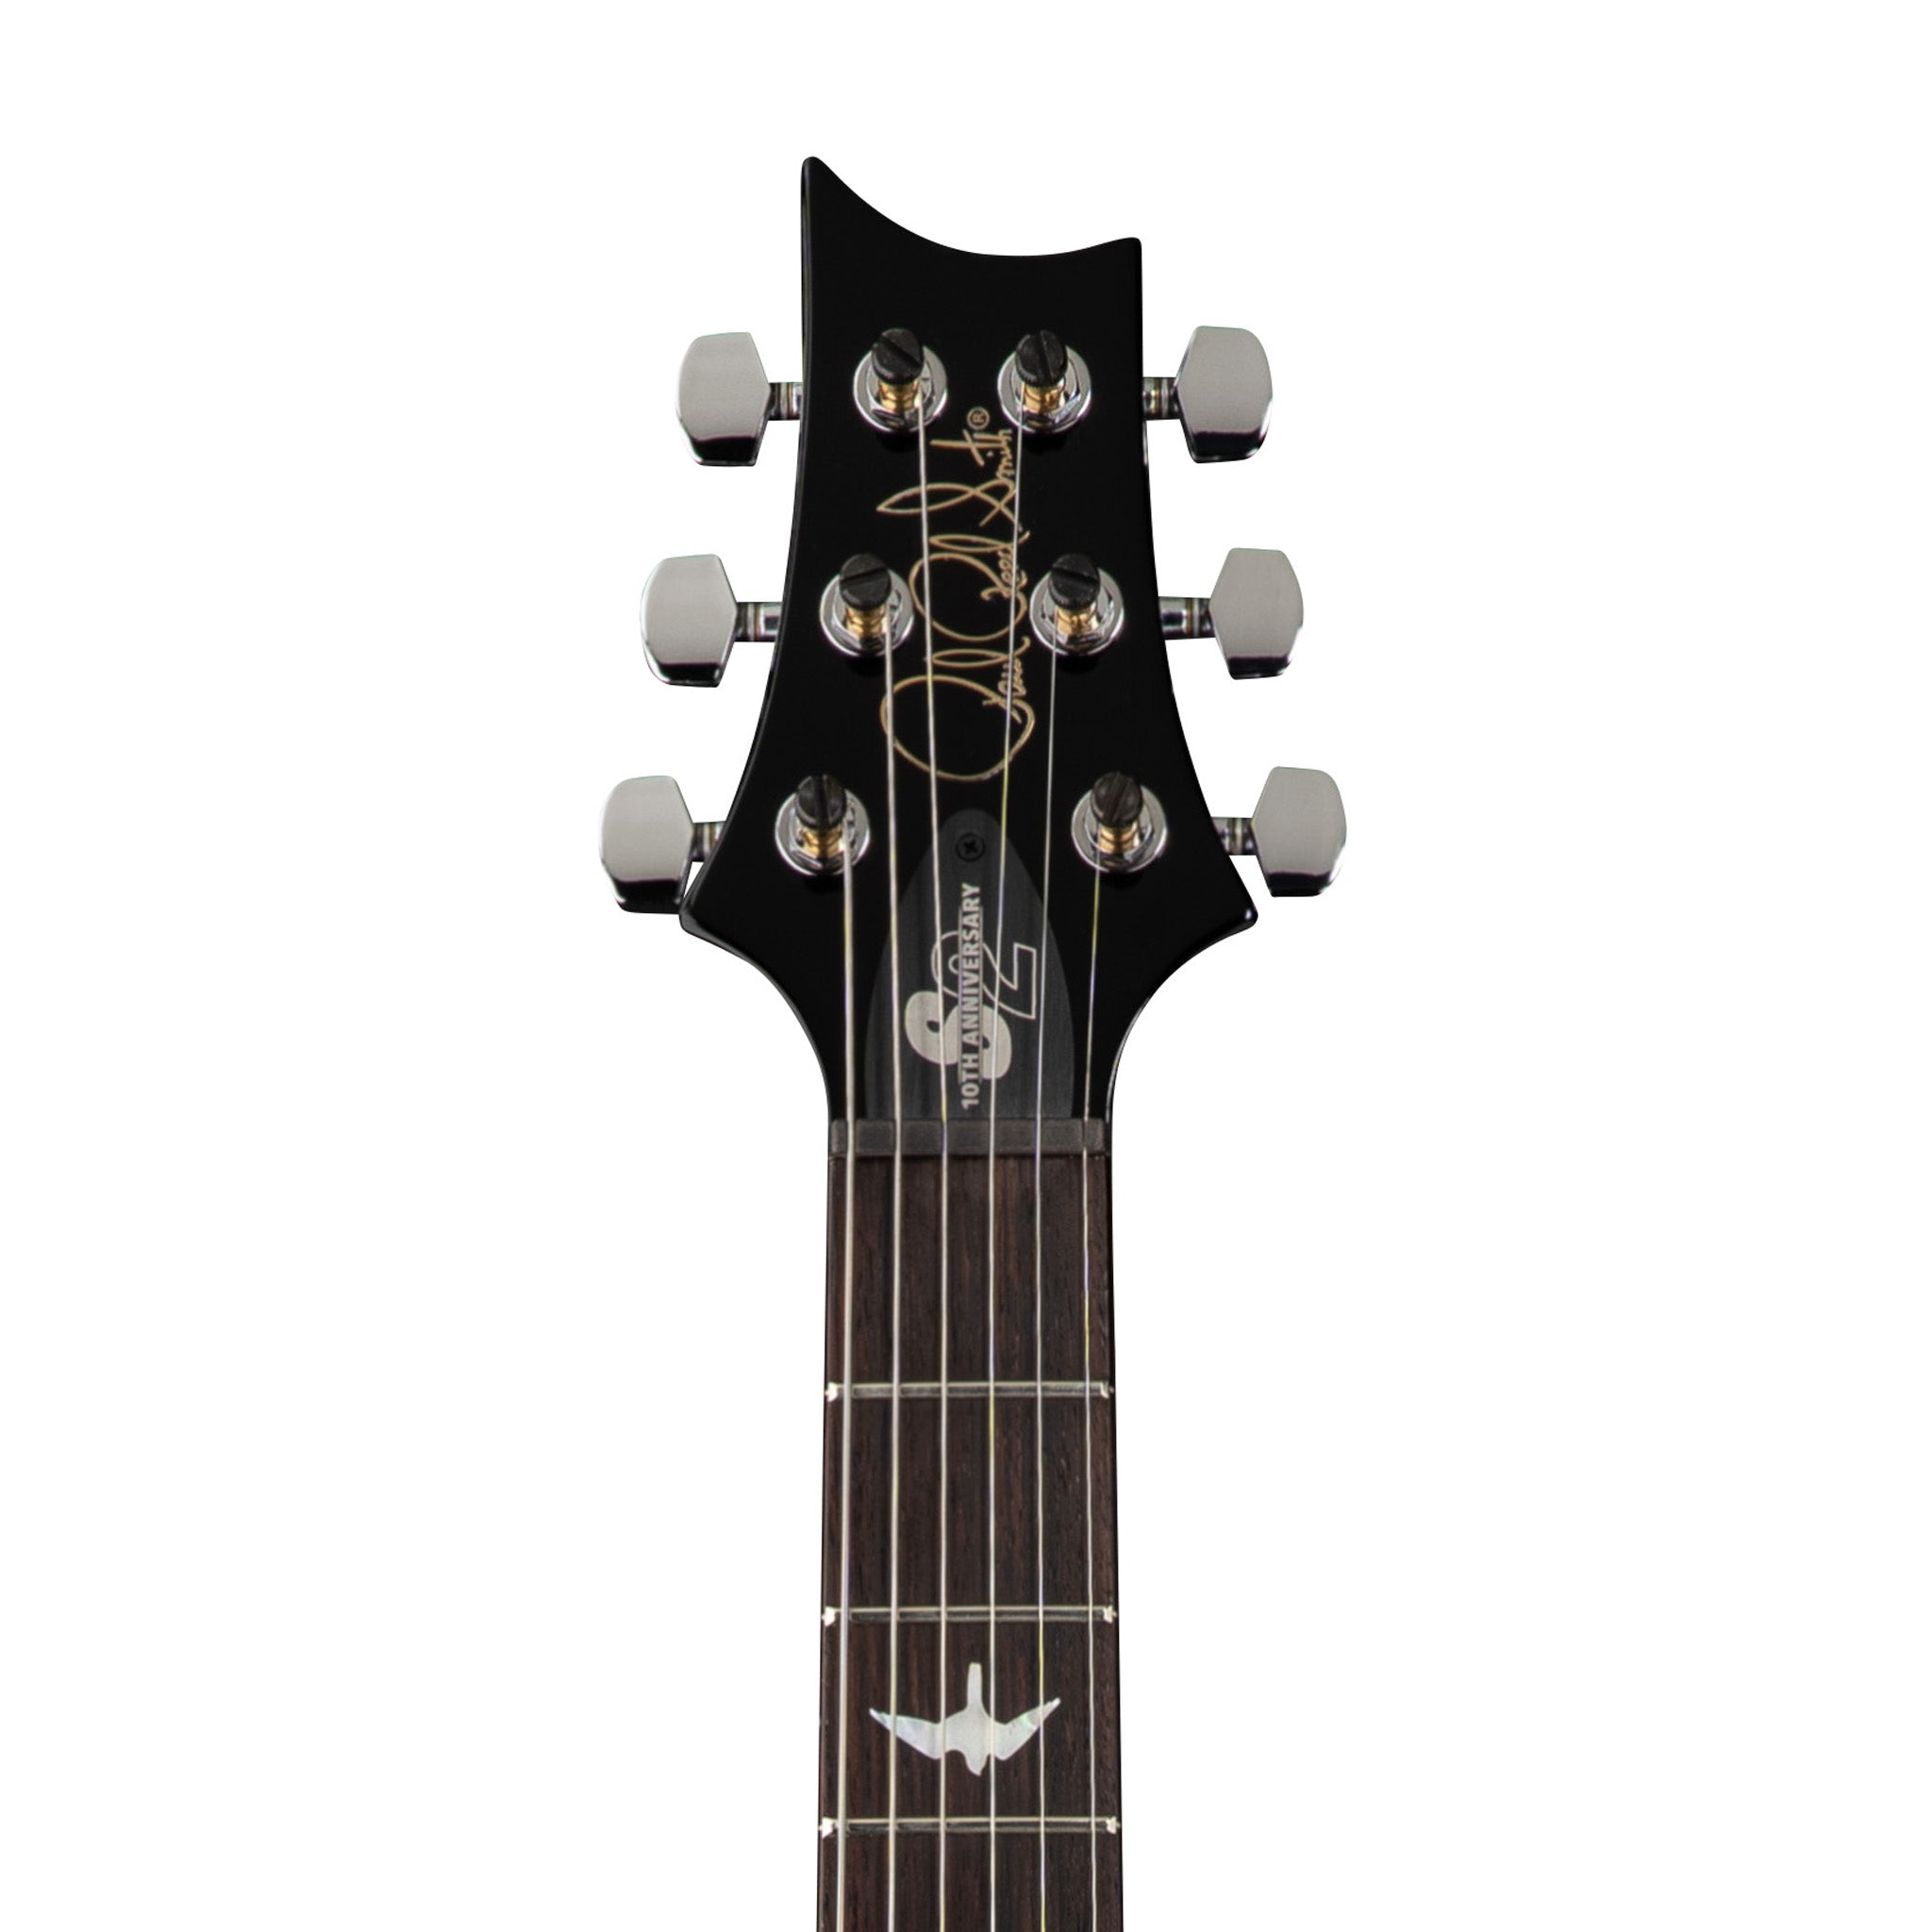 PRS S2 10th Anniversary Custom 24 Limited Edition Electric Guitar, Faded Gray Black Burst